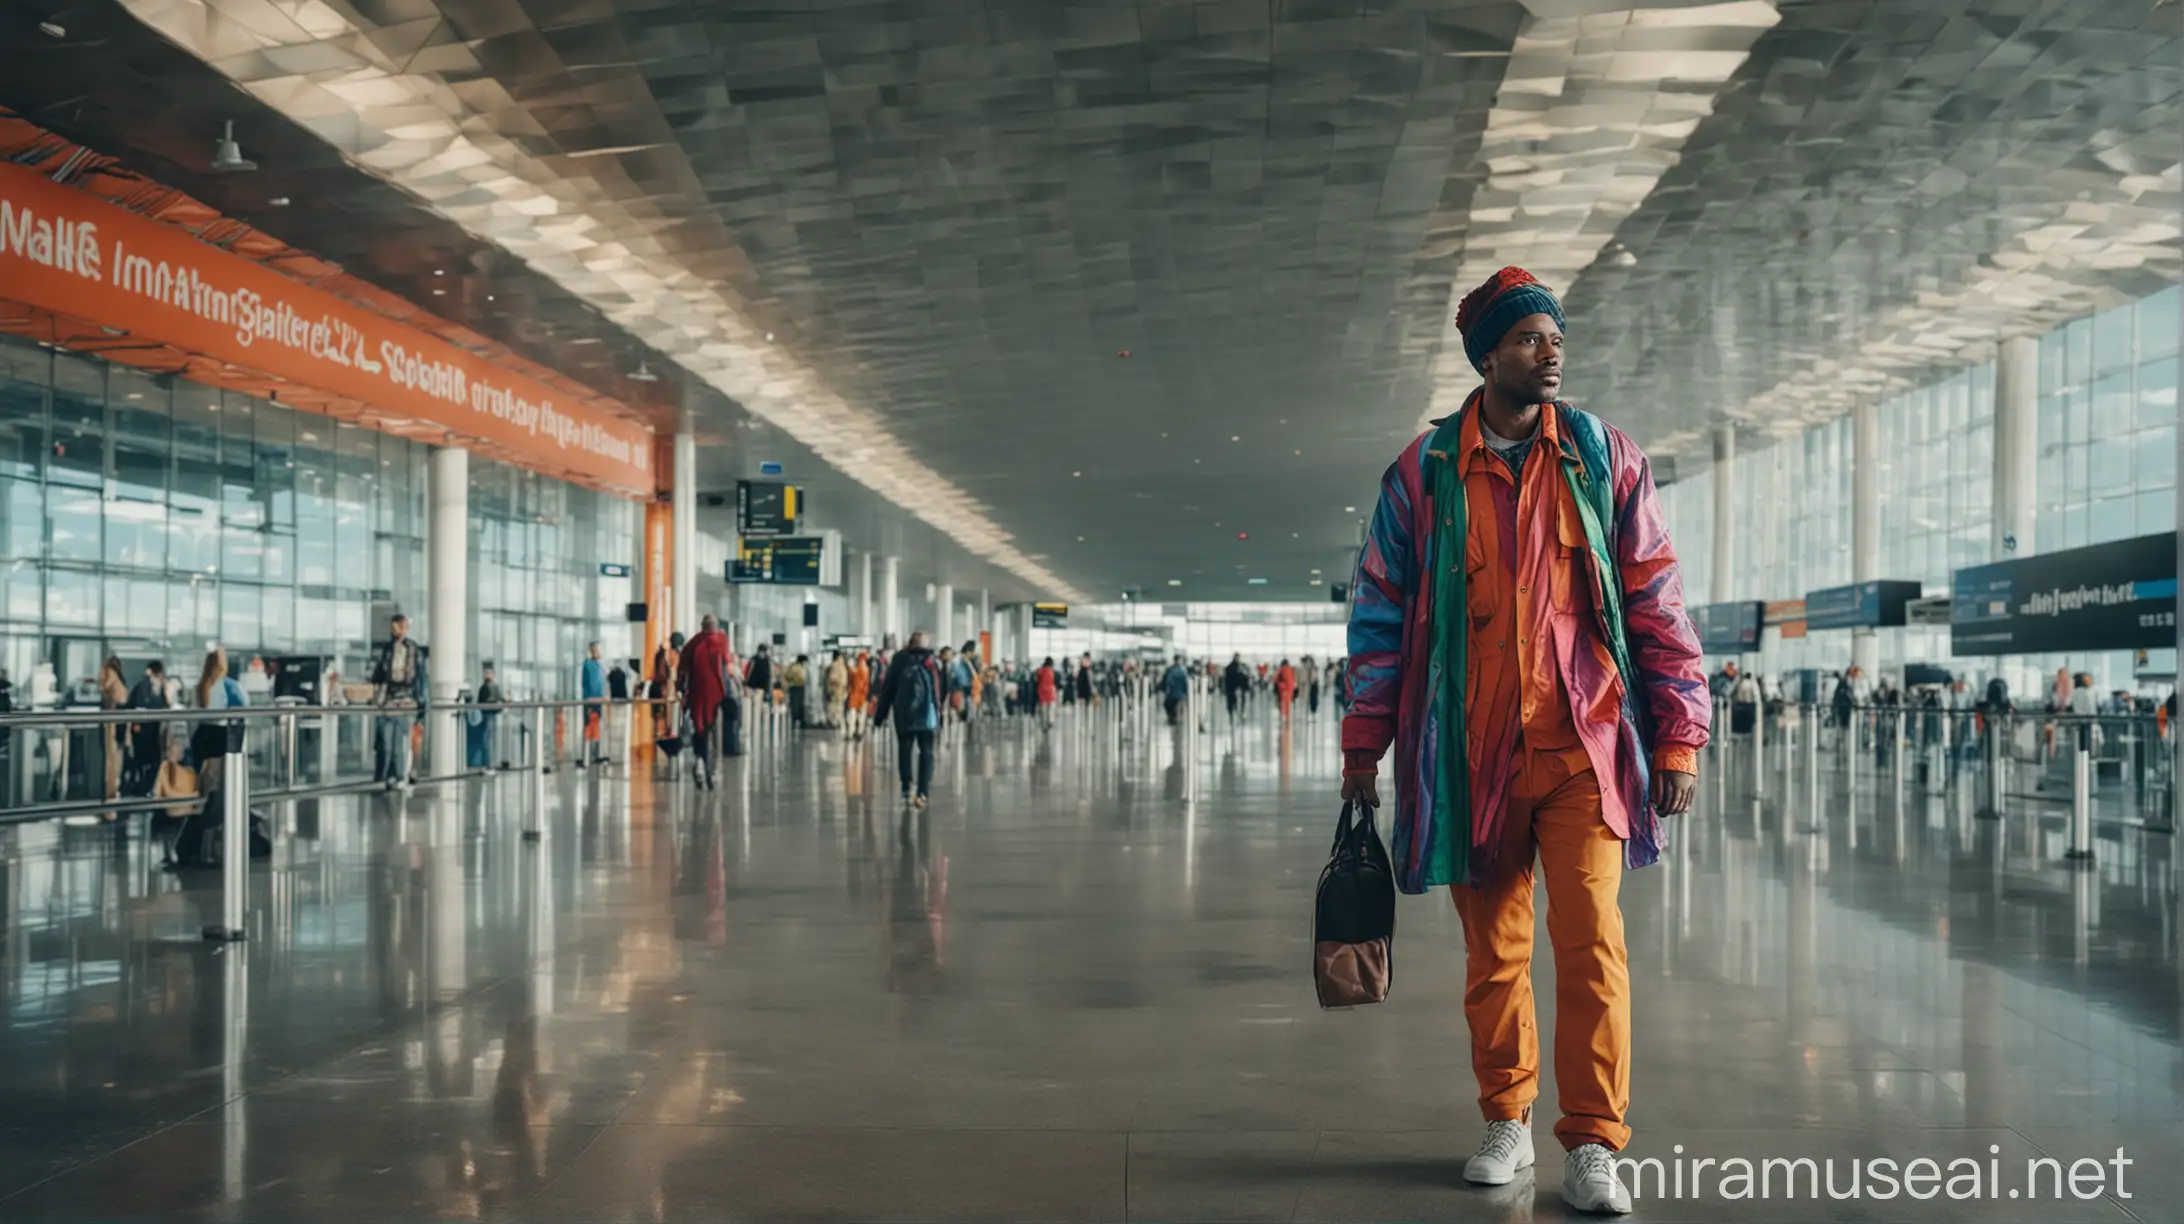 Colorful Man in Airport with Excessive Layers of Clothing